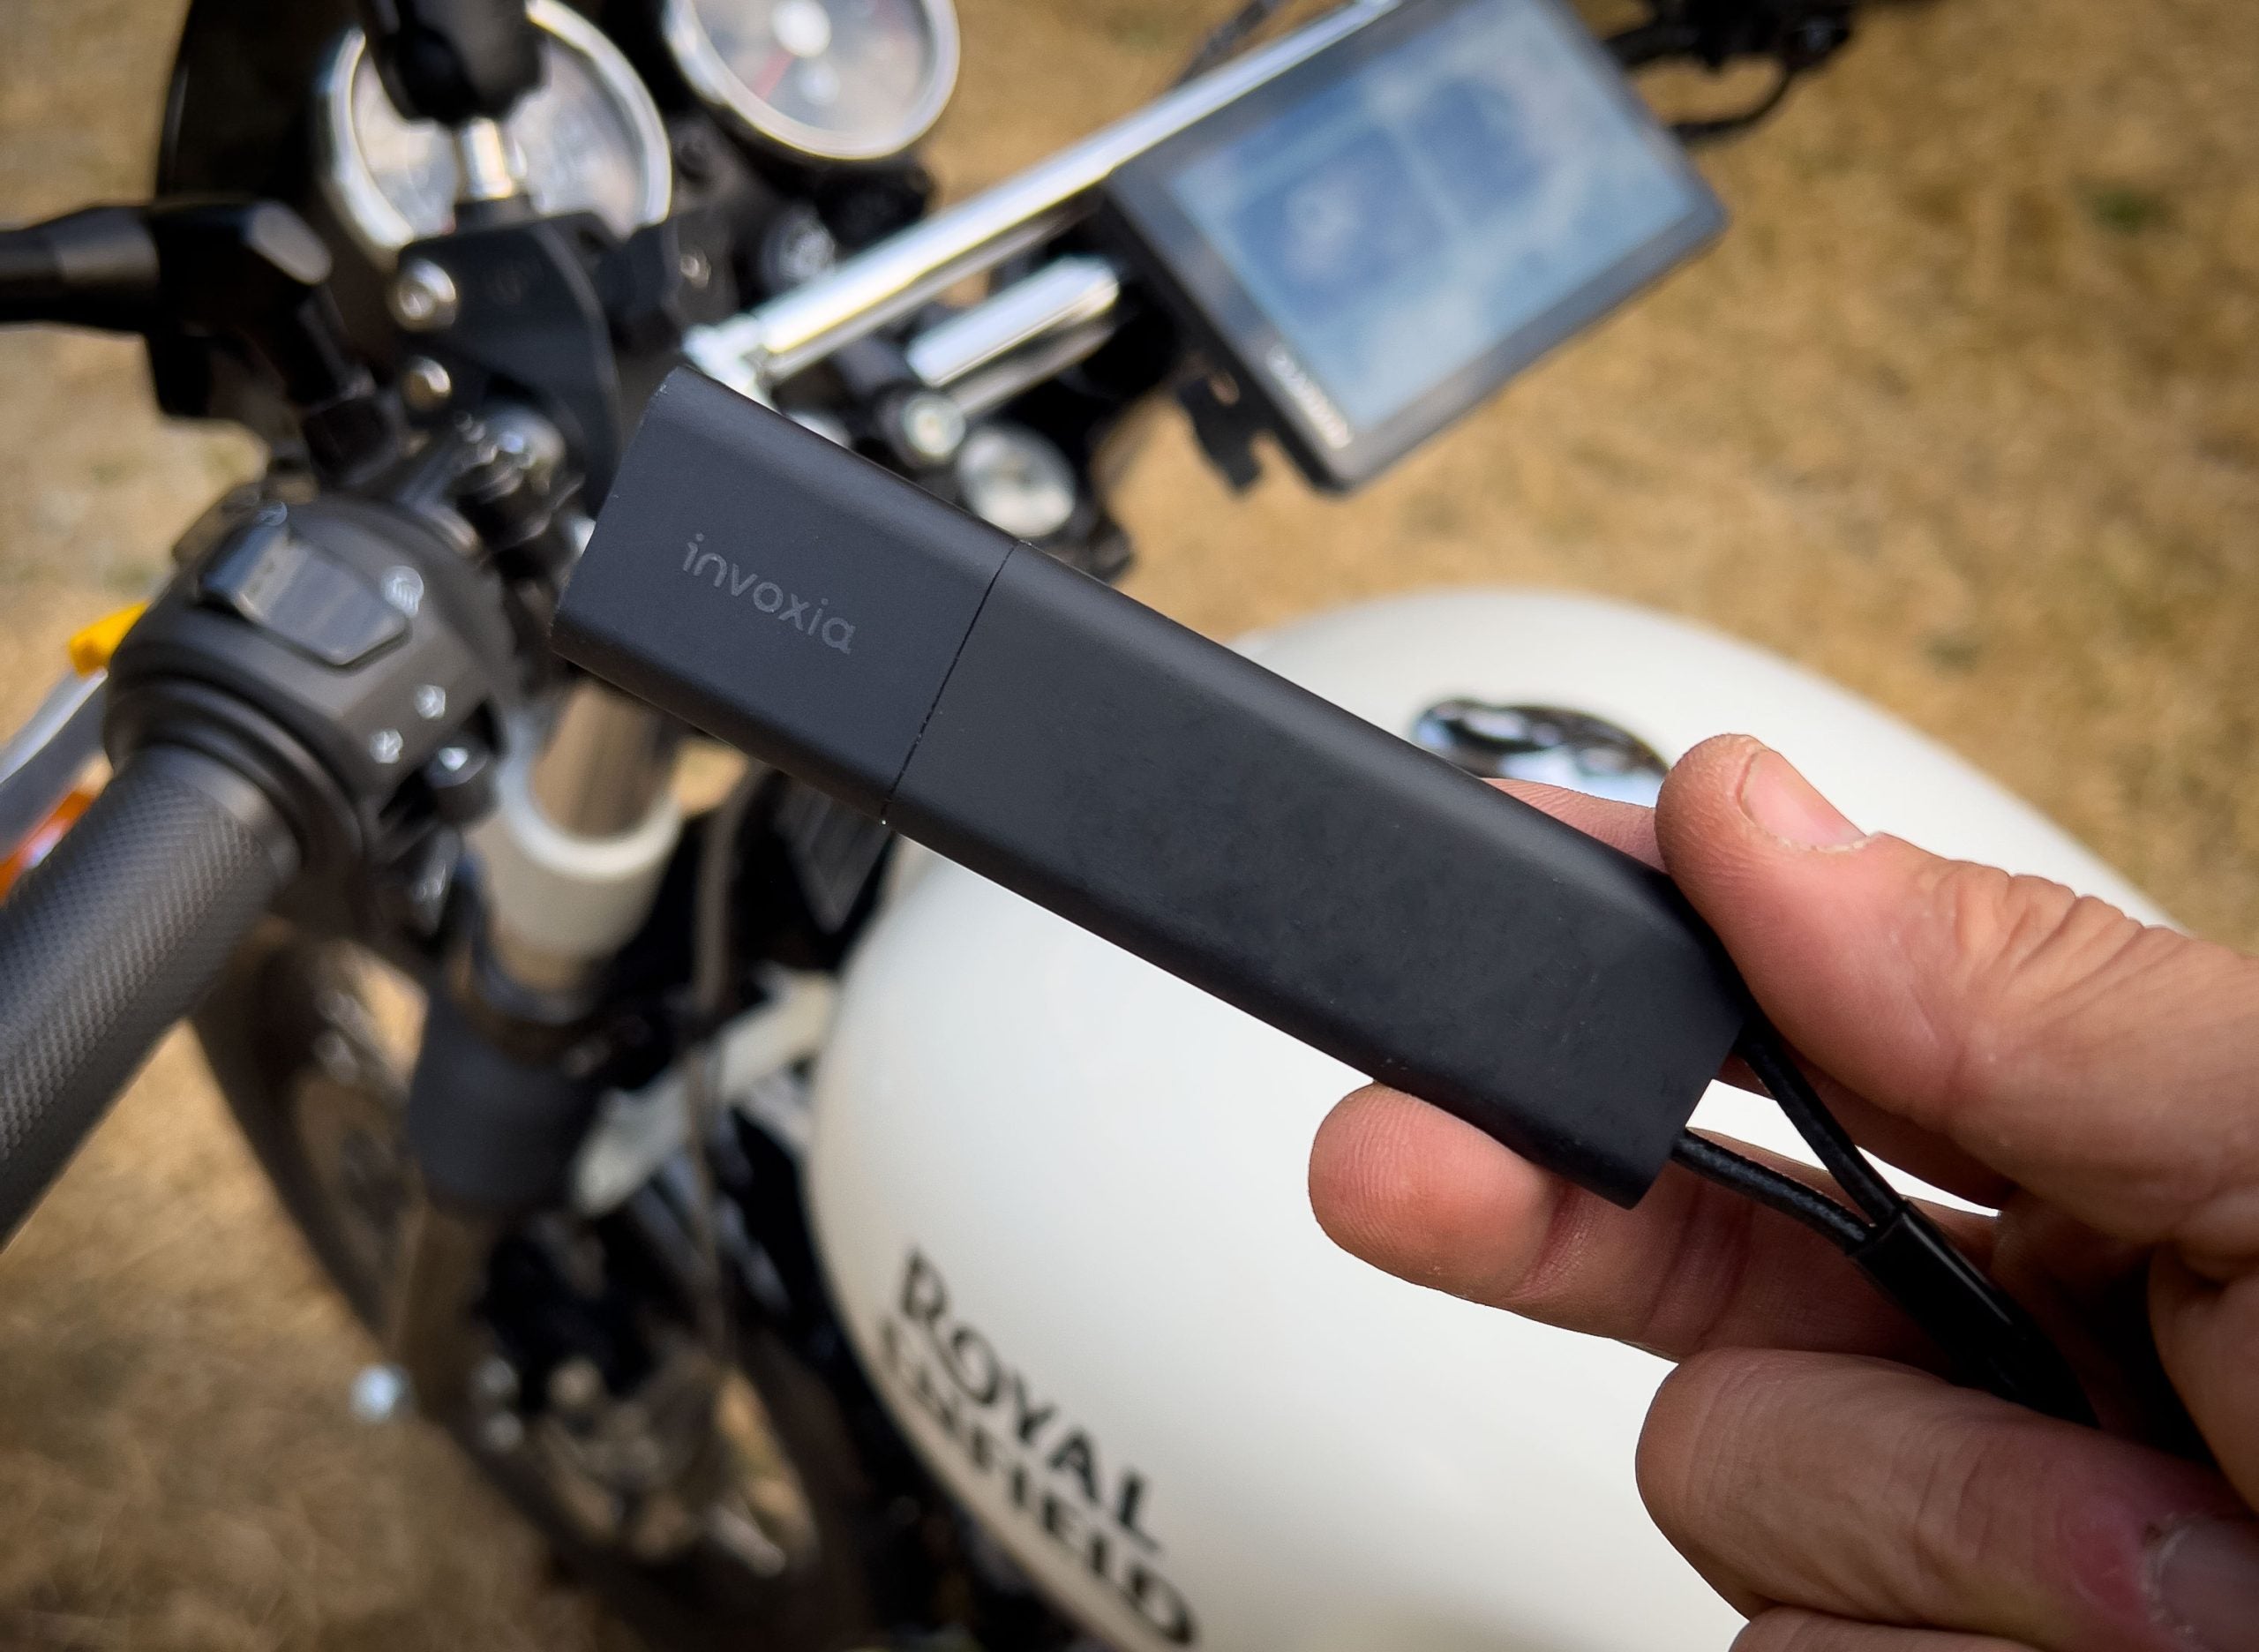 Review / Invoxia's GPS Tracker Tracks Anything, Battery Lasts